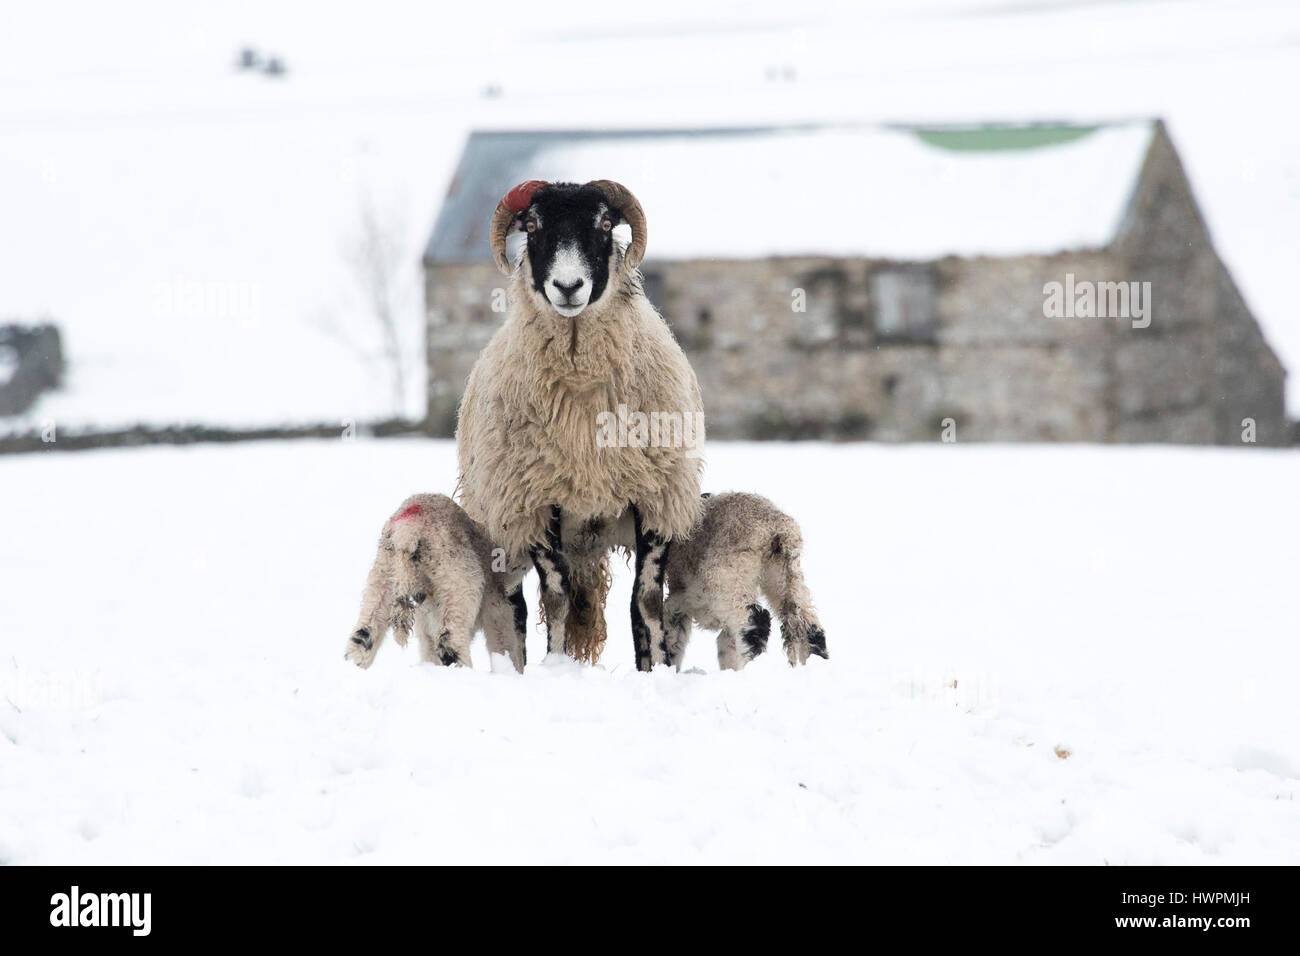 Wensleydale, UK. 22nd Mar, 2017. Swaledale ewes with mule lambs in Wensleydale woke up to a covering of snow after a very mild winter it turned into a cold spring. Credit: Wayne HUTCHINSON/Alamy Live News Stock Photo